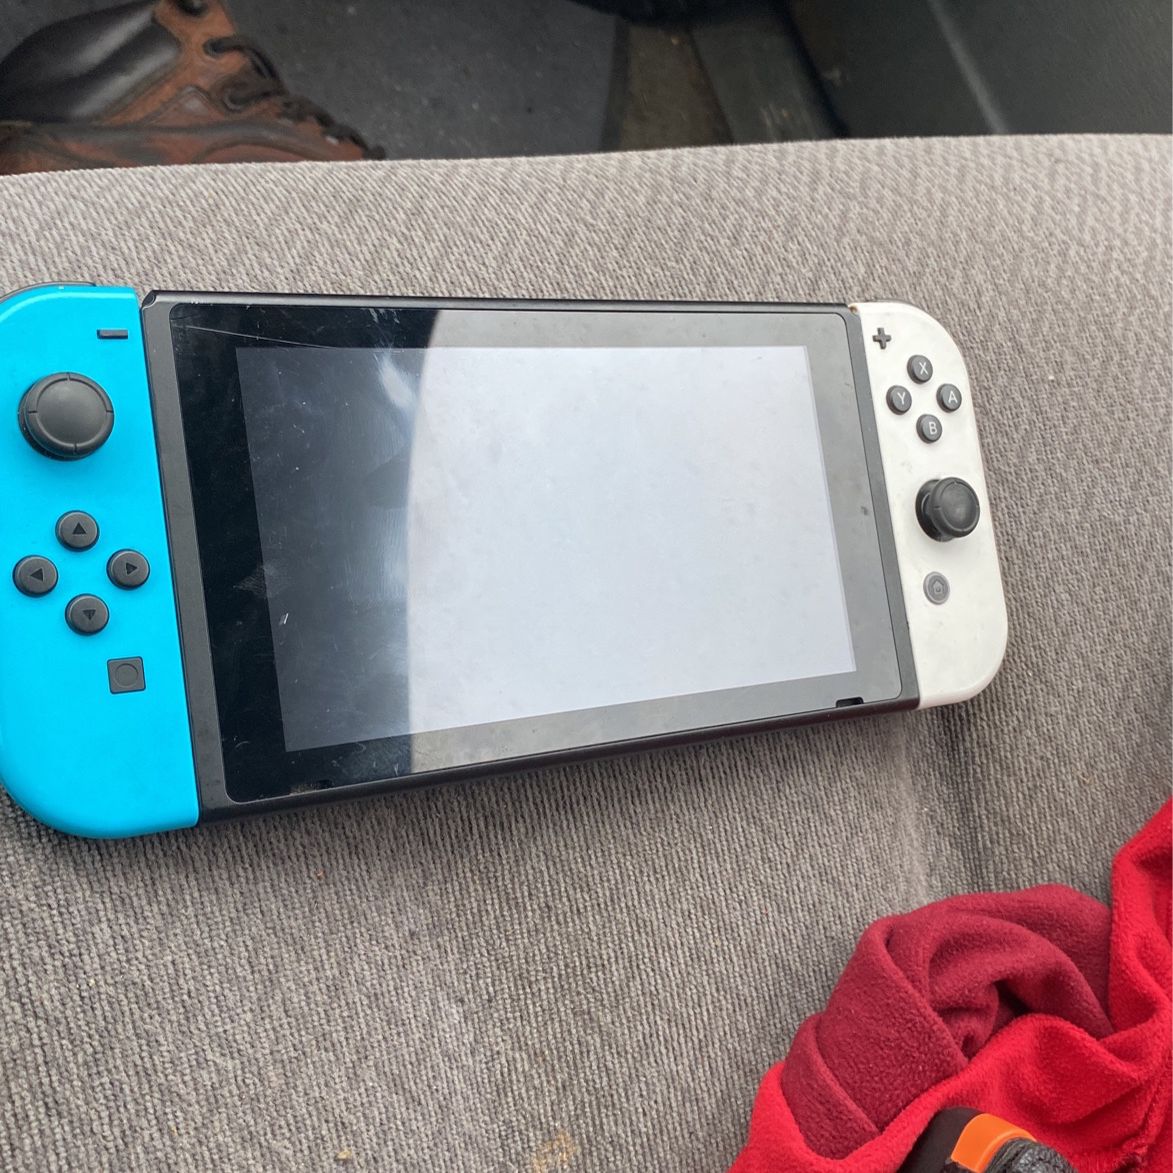 Nintendo switch slightly used But In Great Condition Comes With 4 Downloadable Games